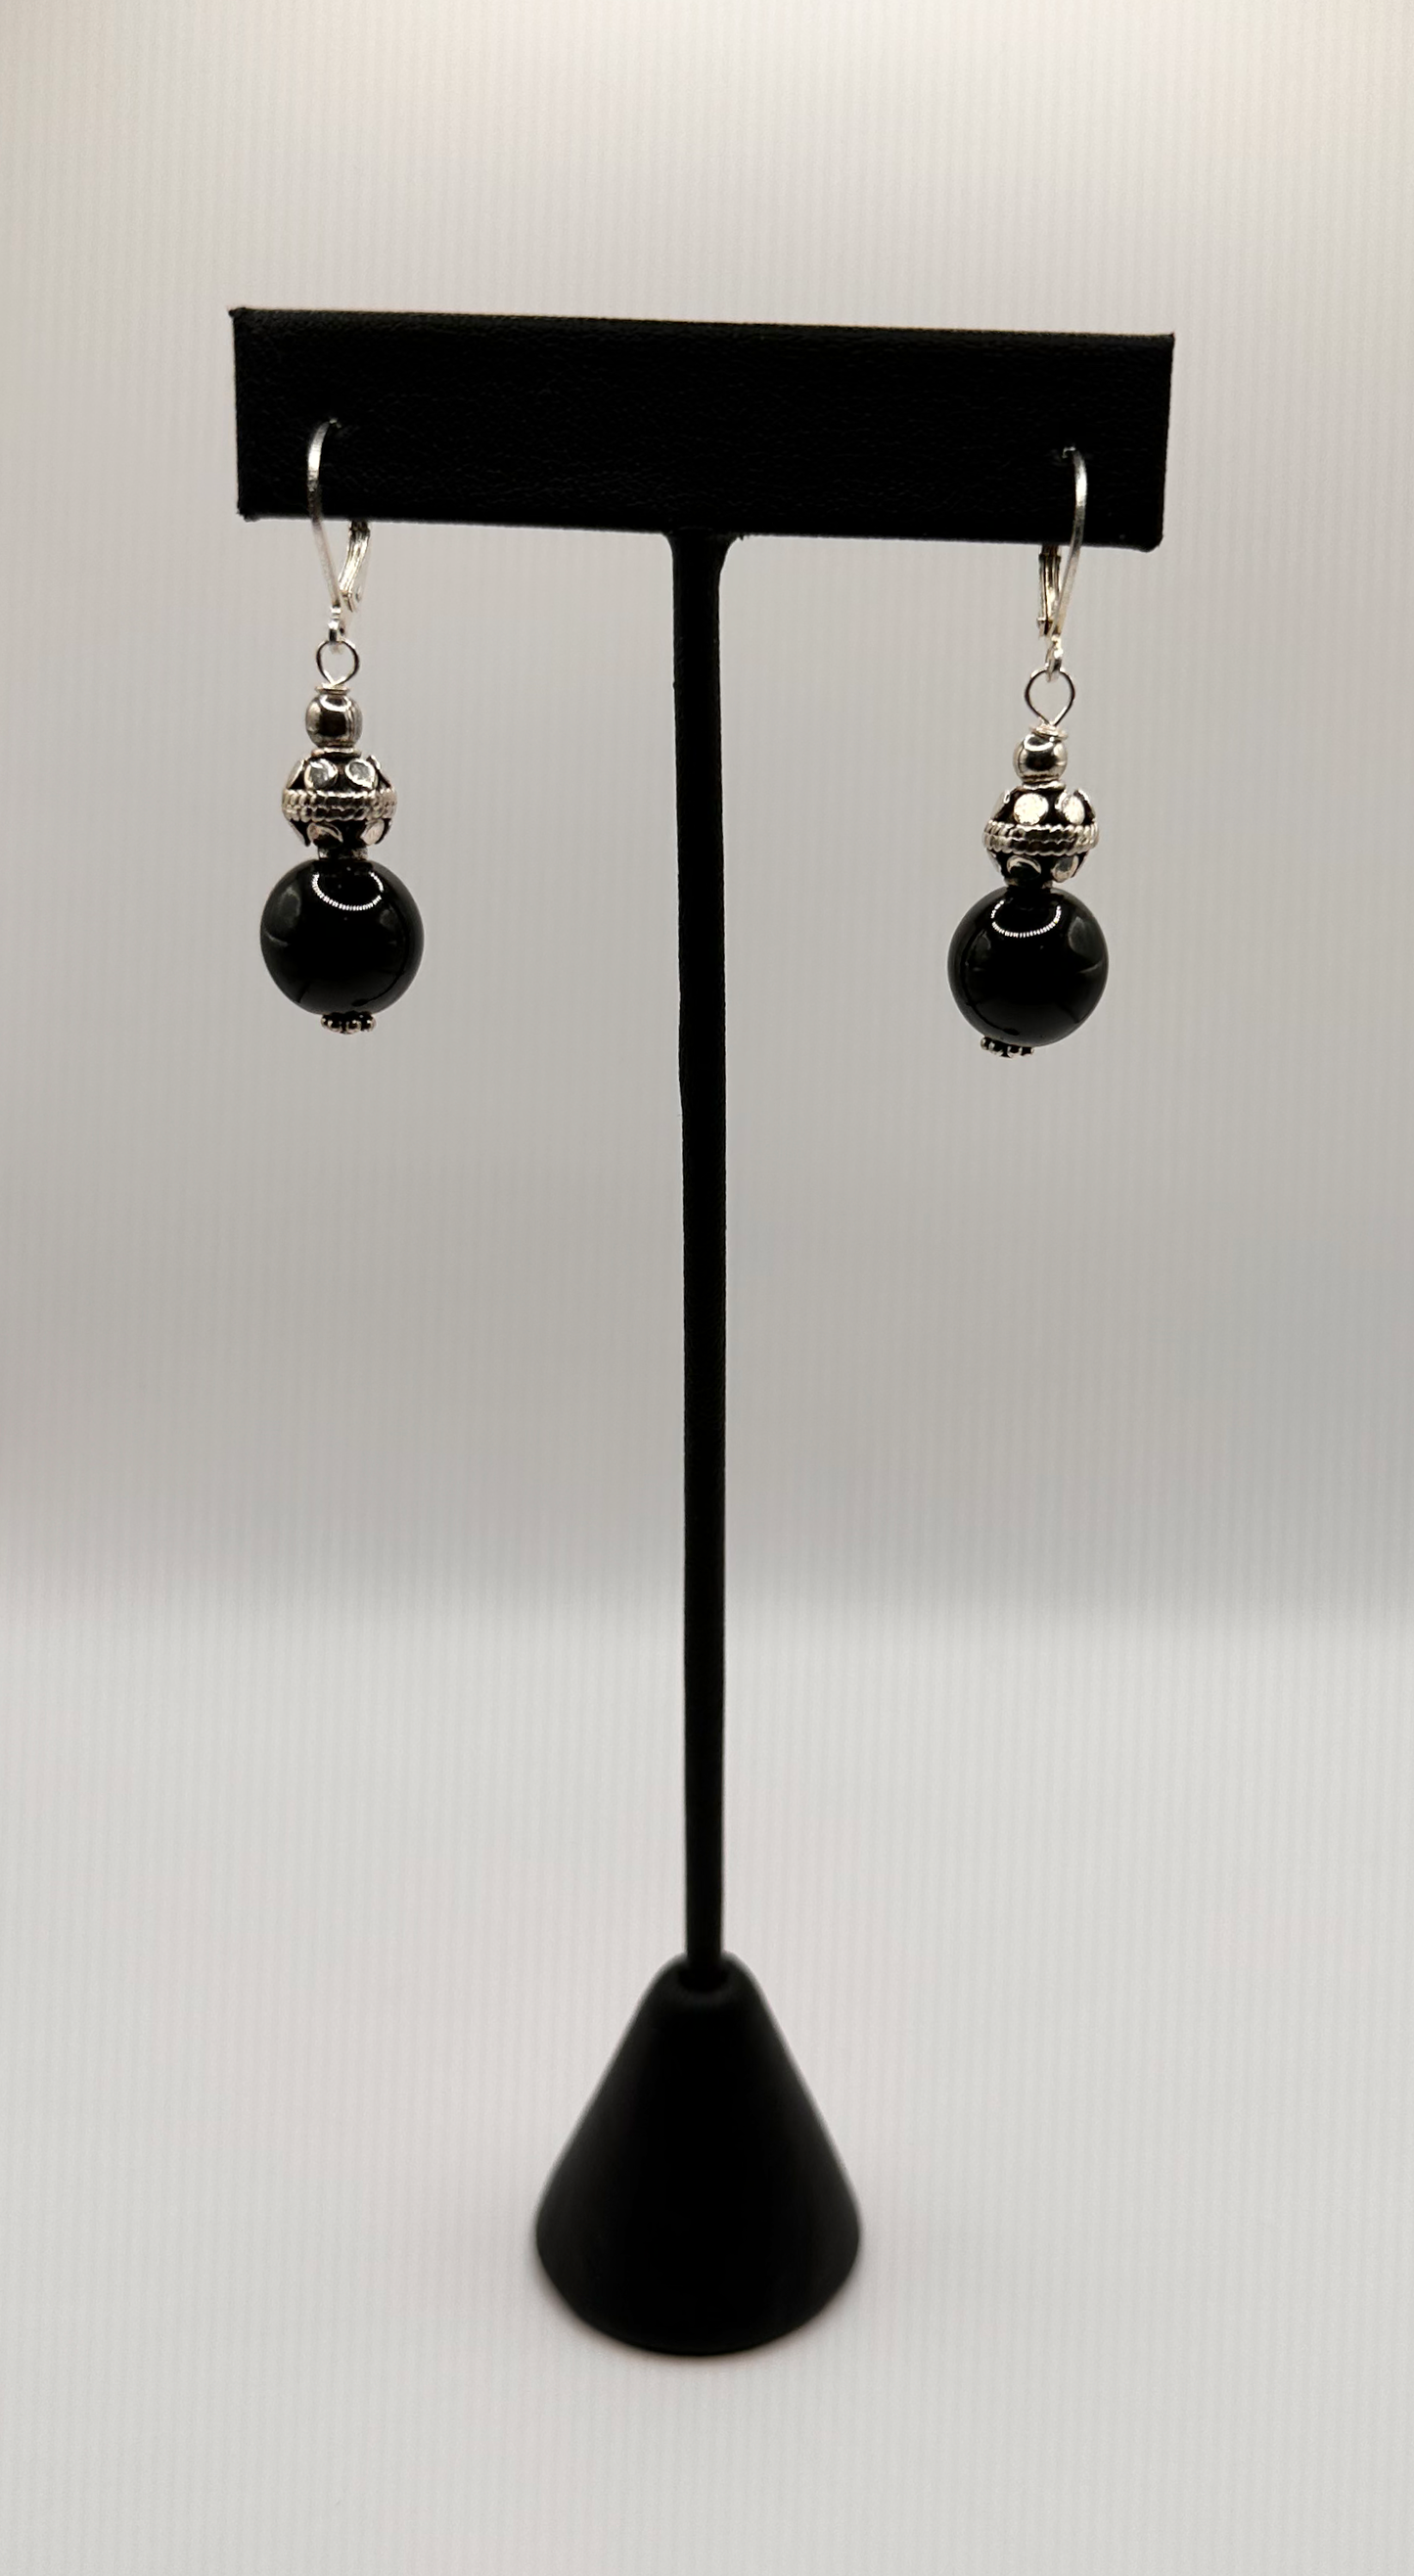 Black Onyx with Bali Sterling Silver Ball Earrings